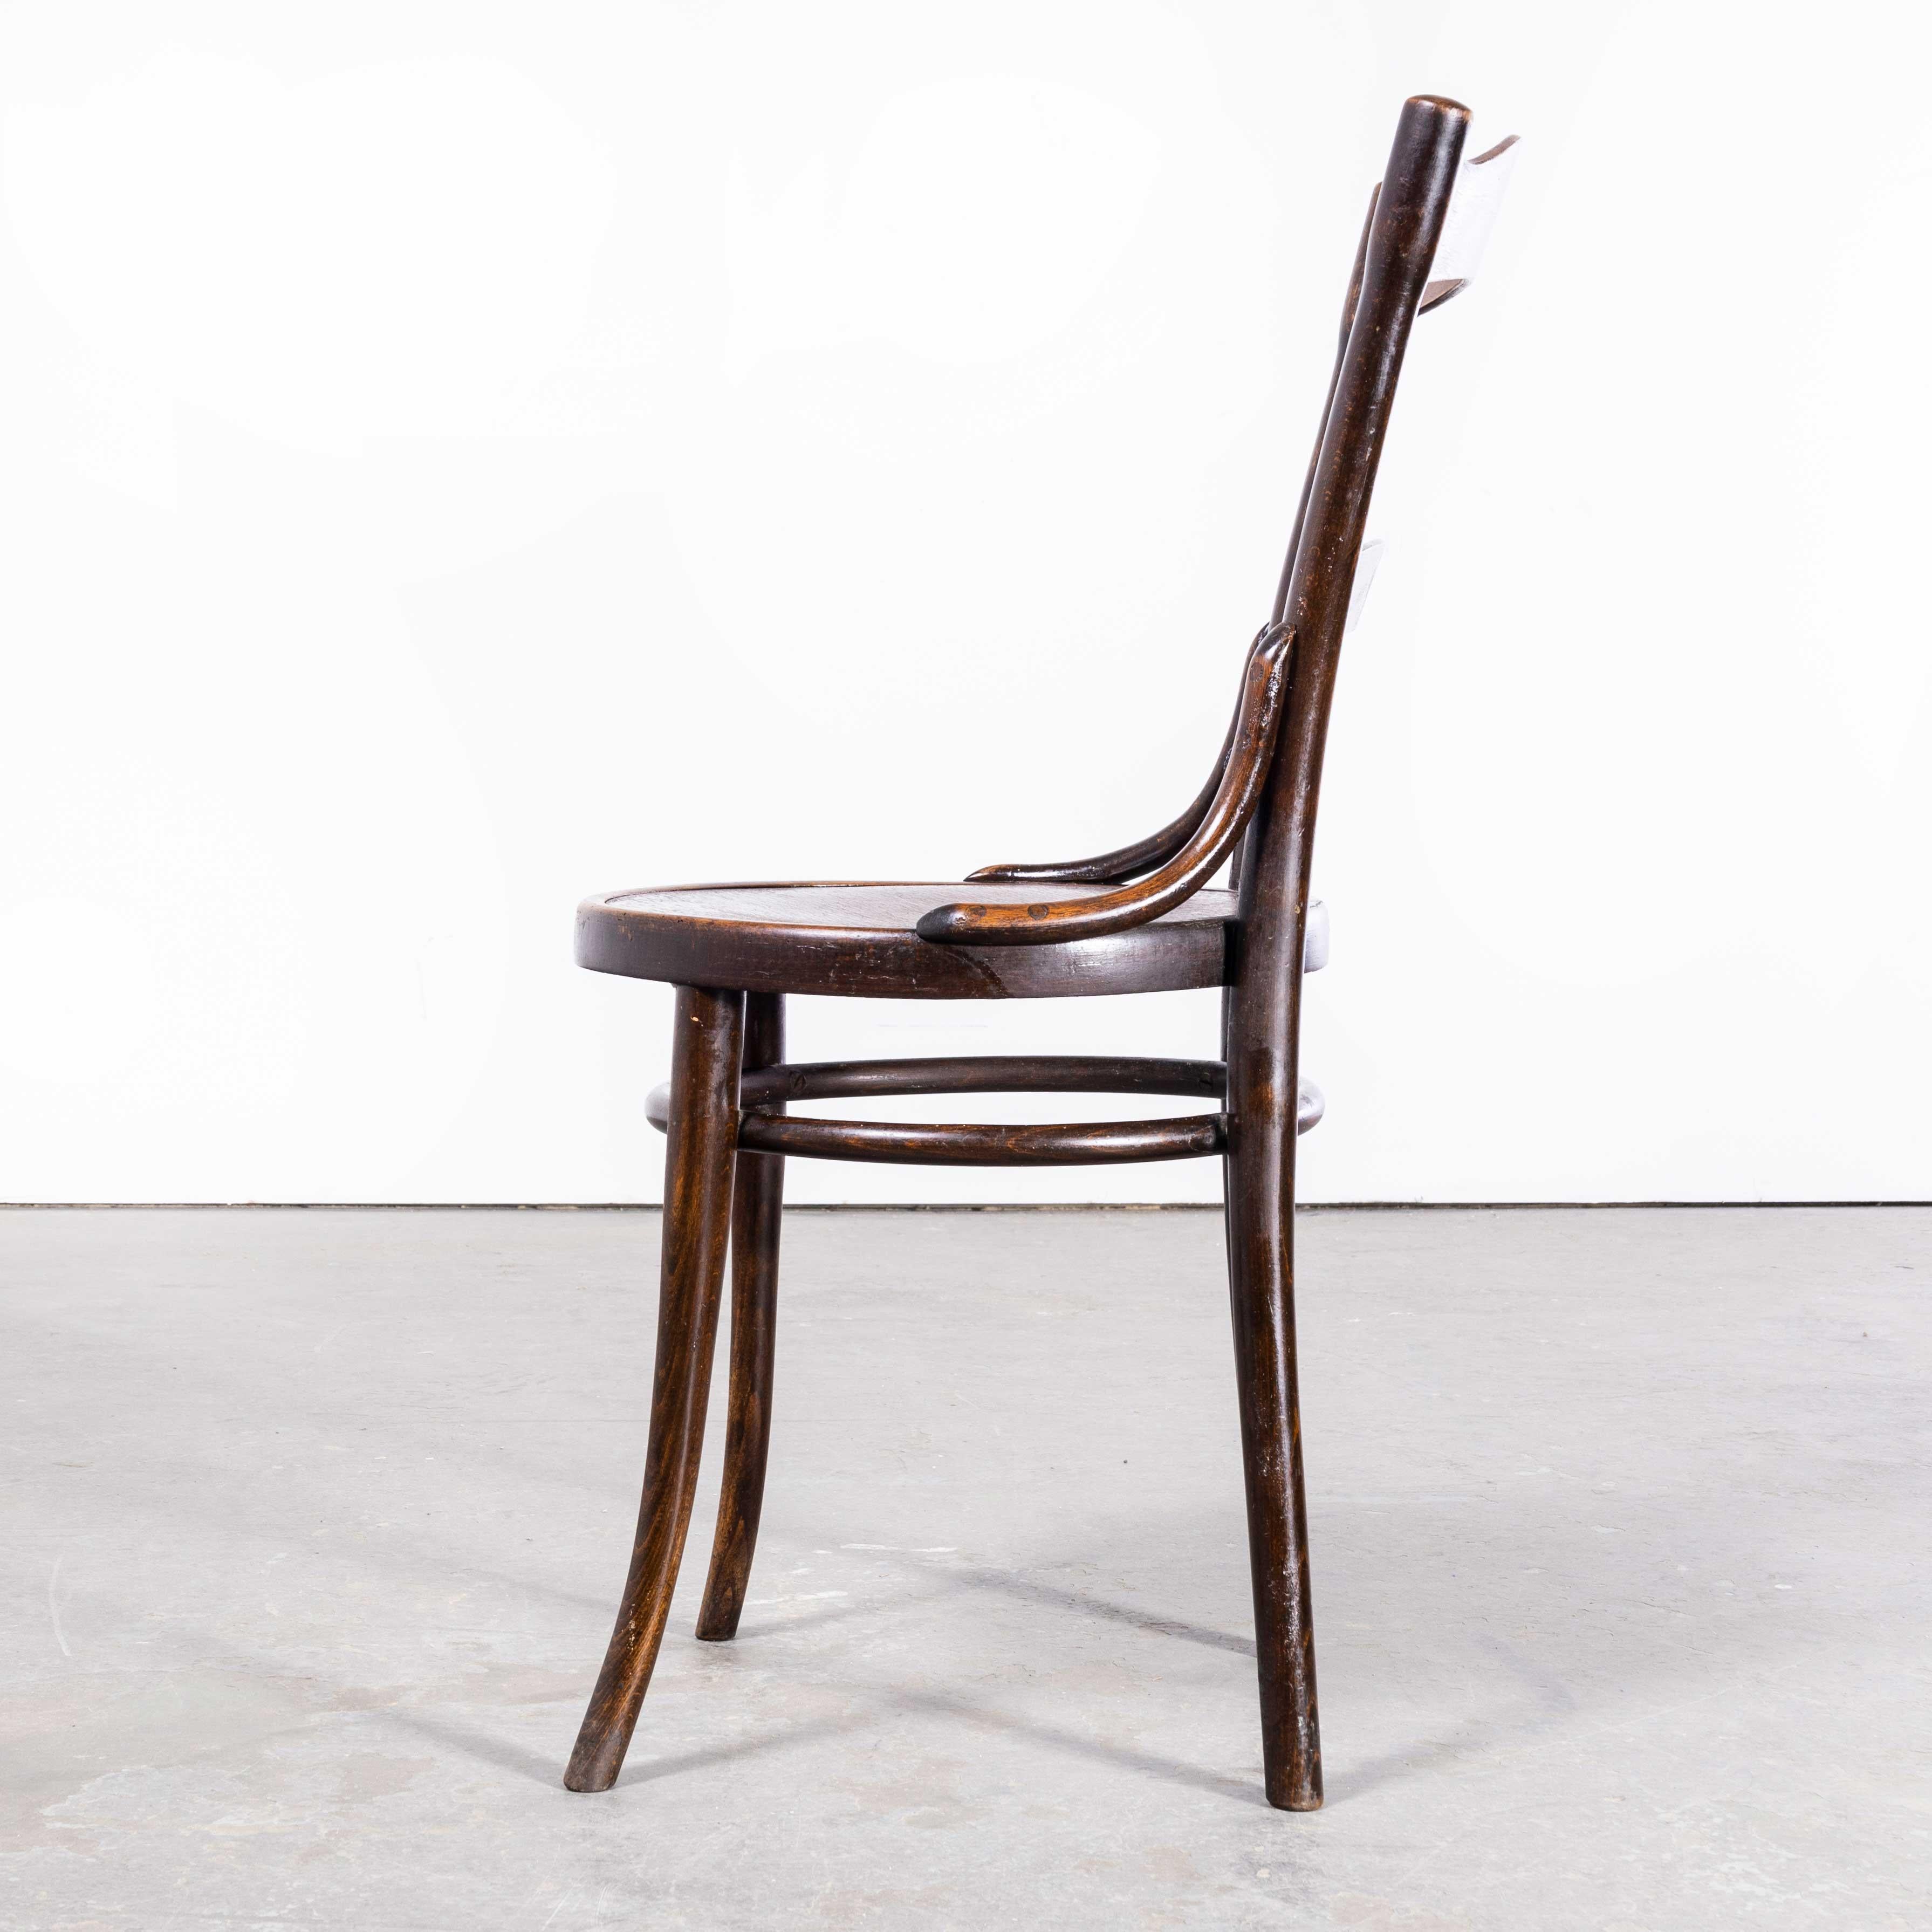 1890?s Bentwood Debrecen Single Dining Chair
1890’s Bentwood Debrecen Elegant Single Dining Chair. It is hard to be precise about the origin of this chair as little history is known, but what we do know is at the beginning of the 20th Century two